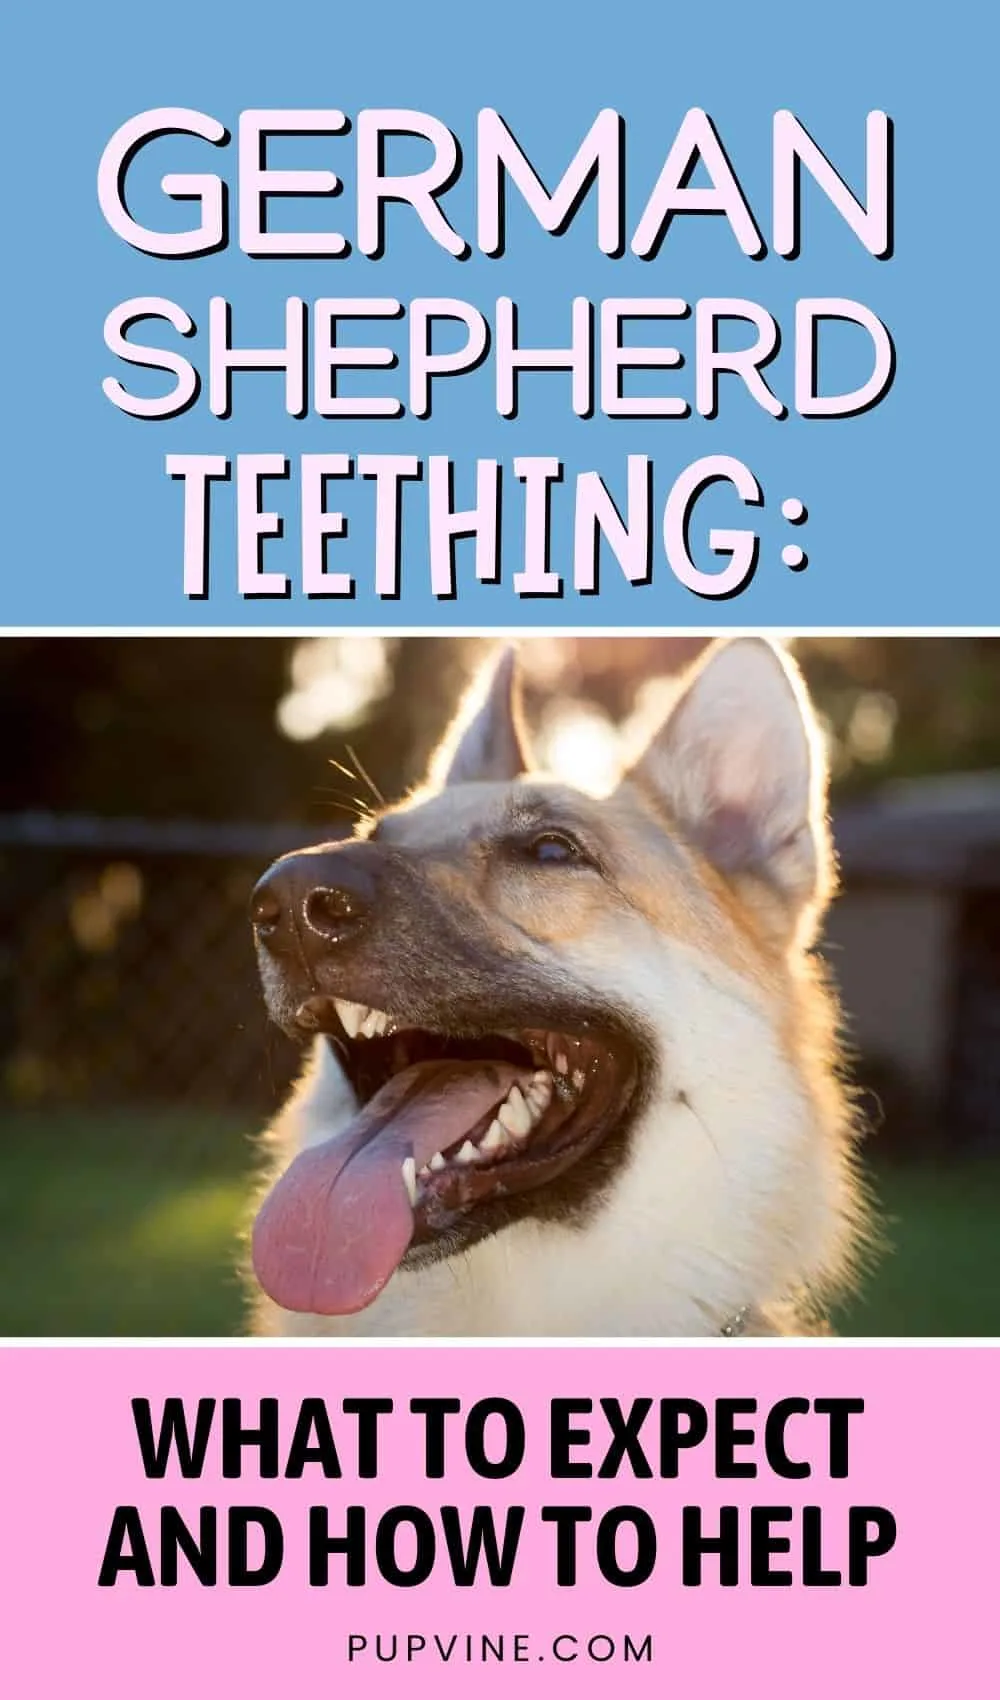 German Shepherd Teething What To Expect And How To Help